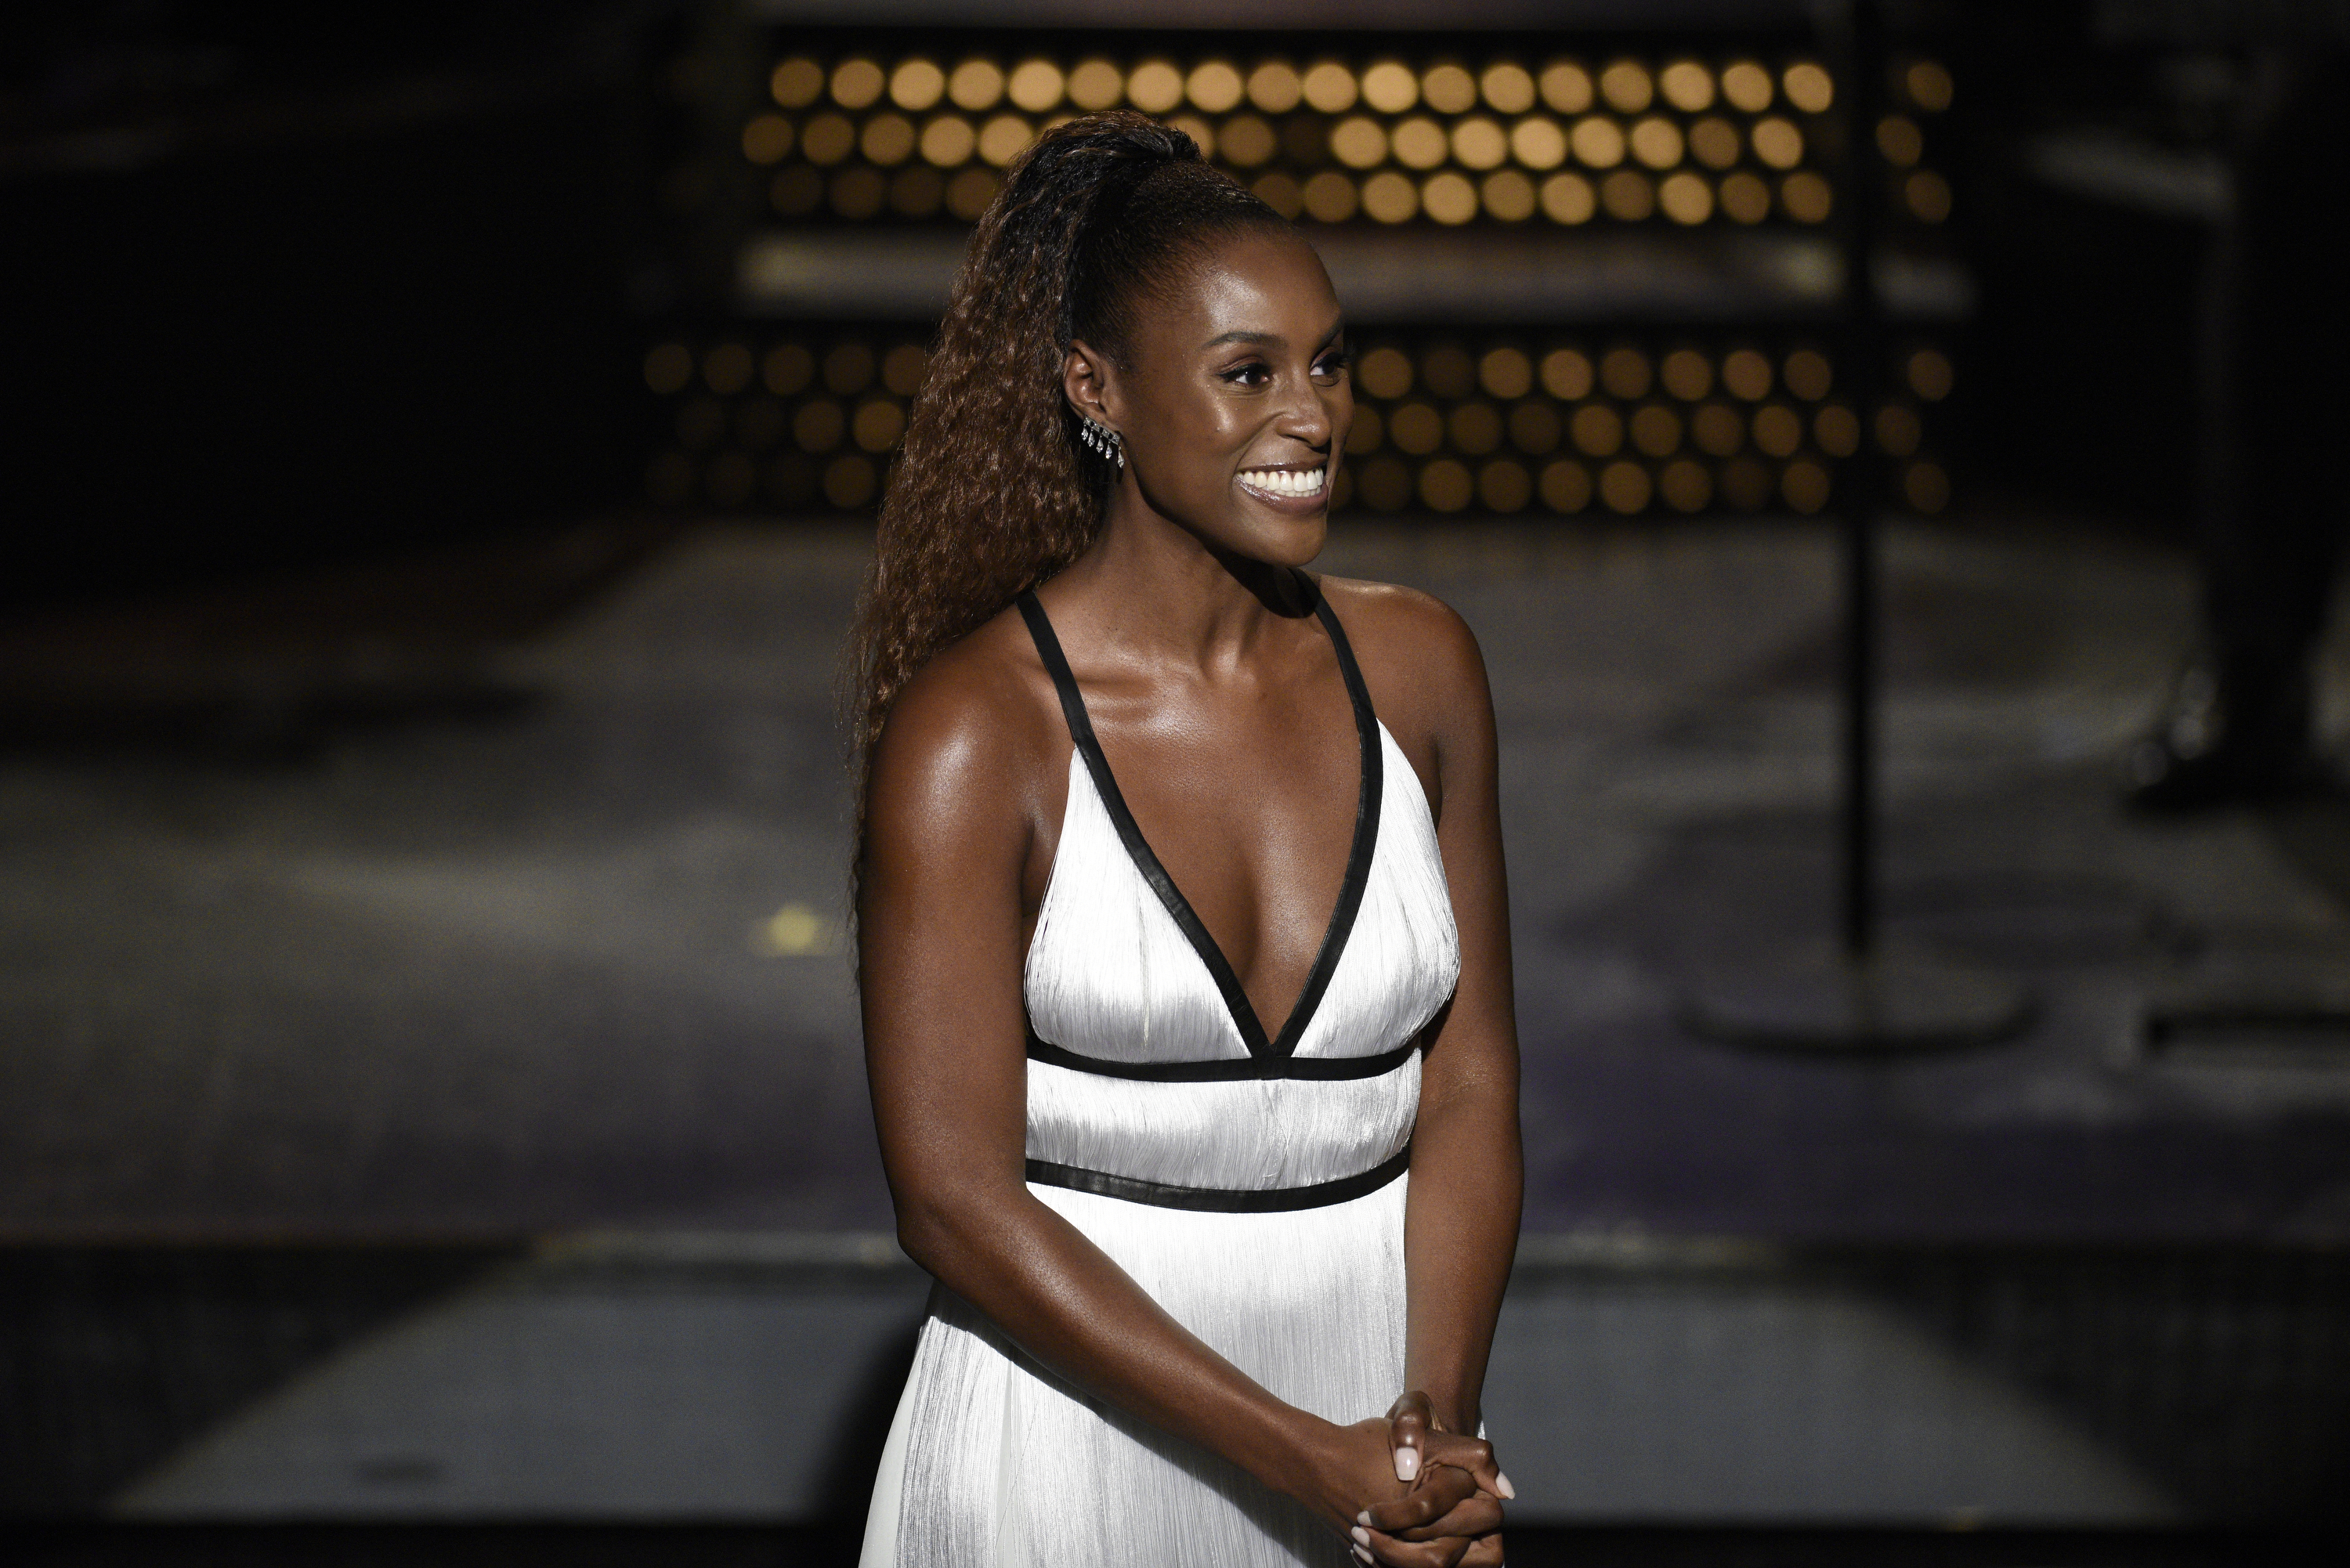 Actress in white V-neck dress smiles on stage, hands clasped together